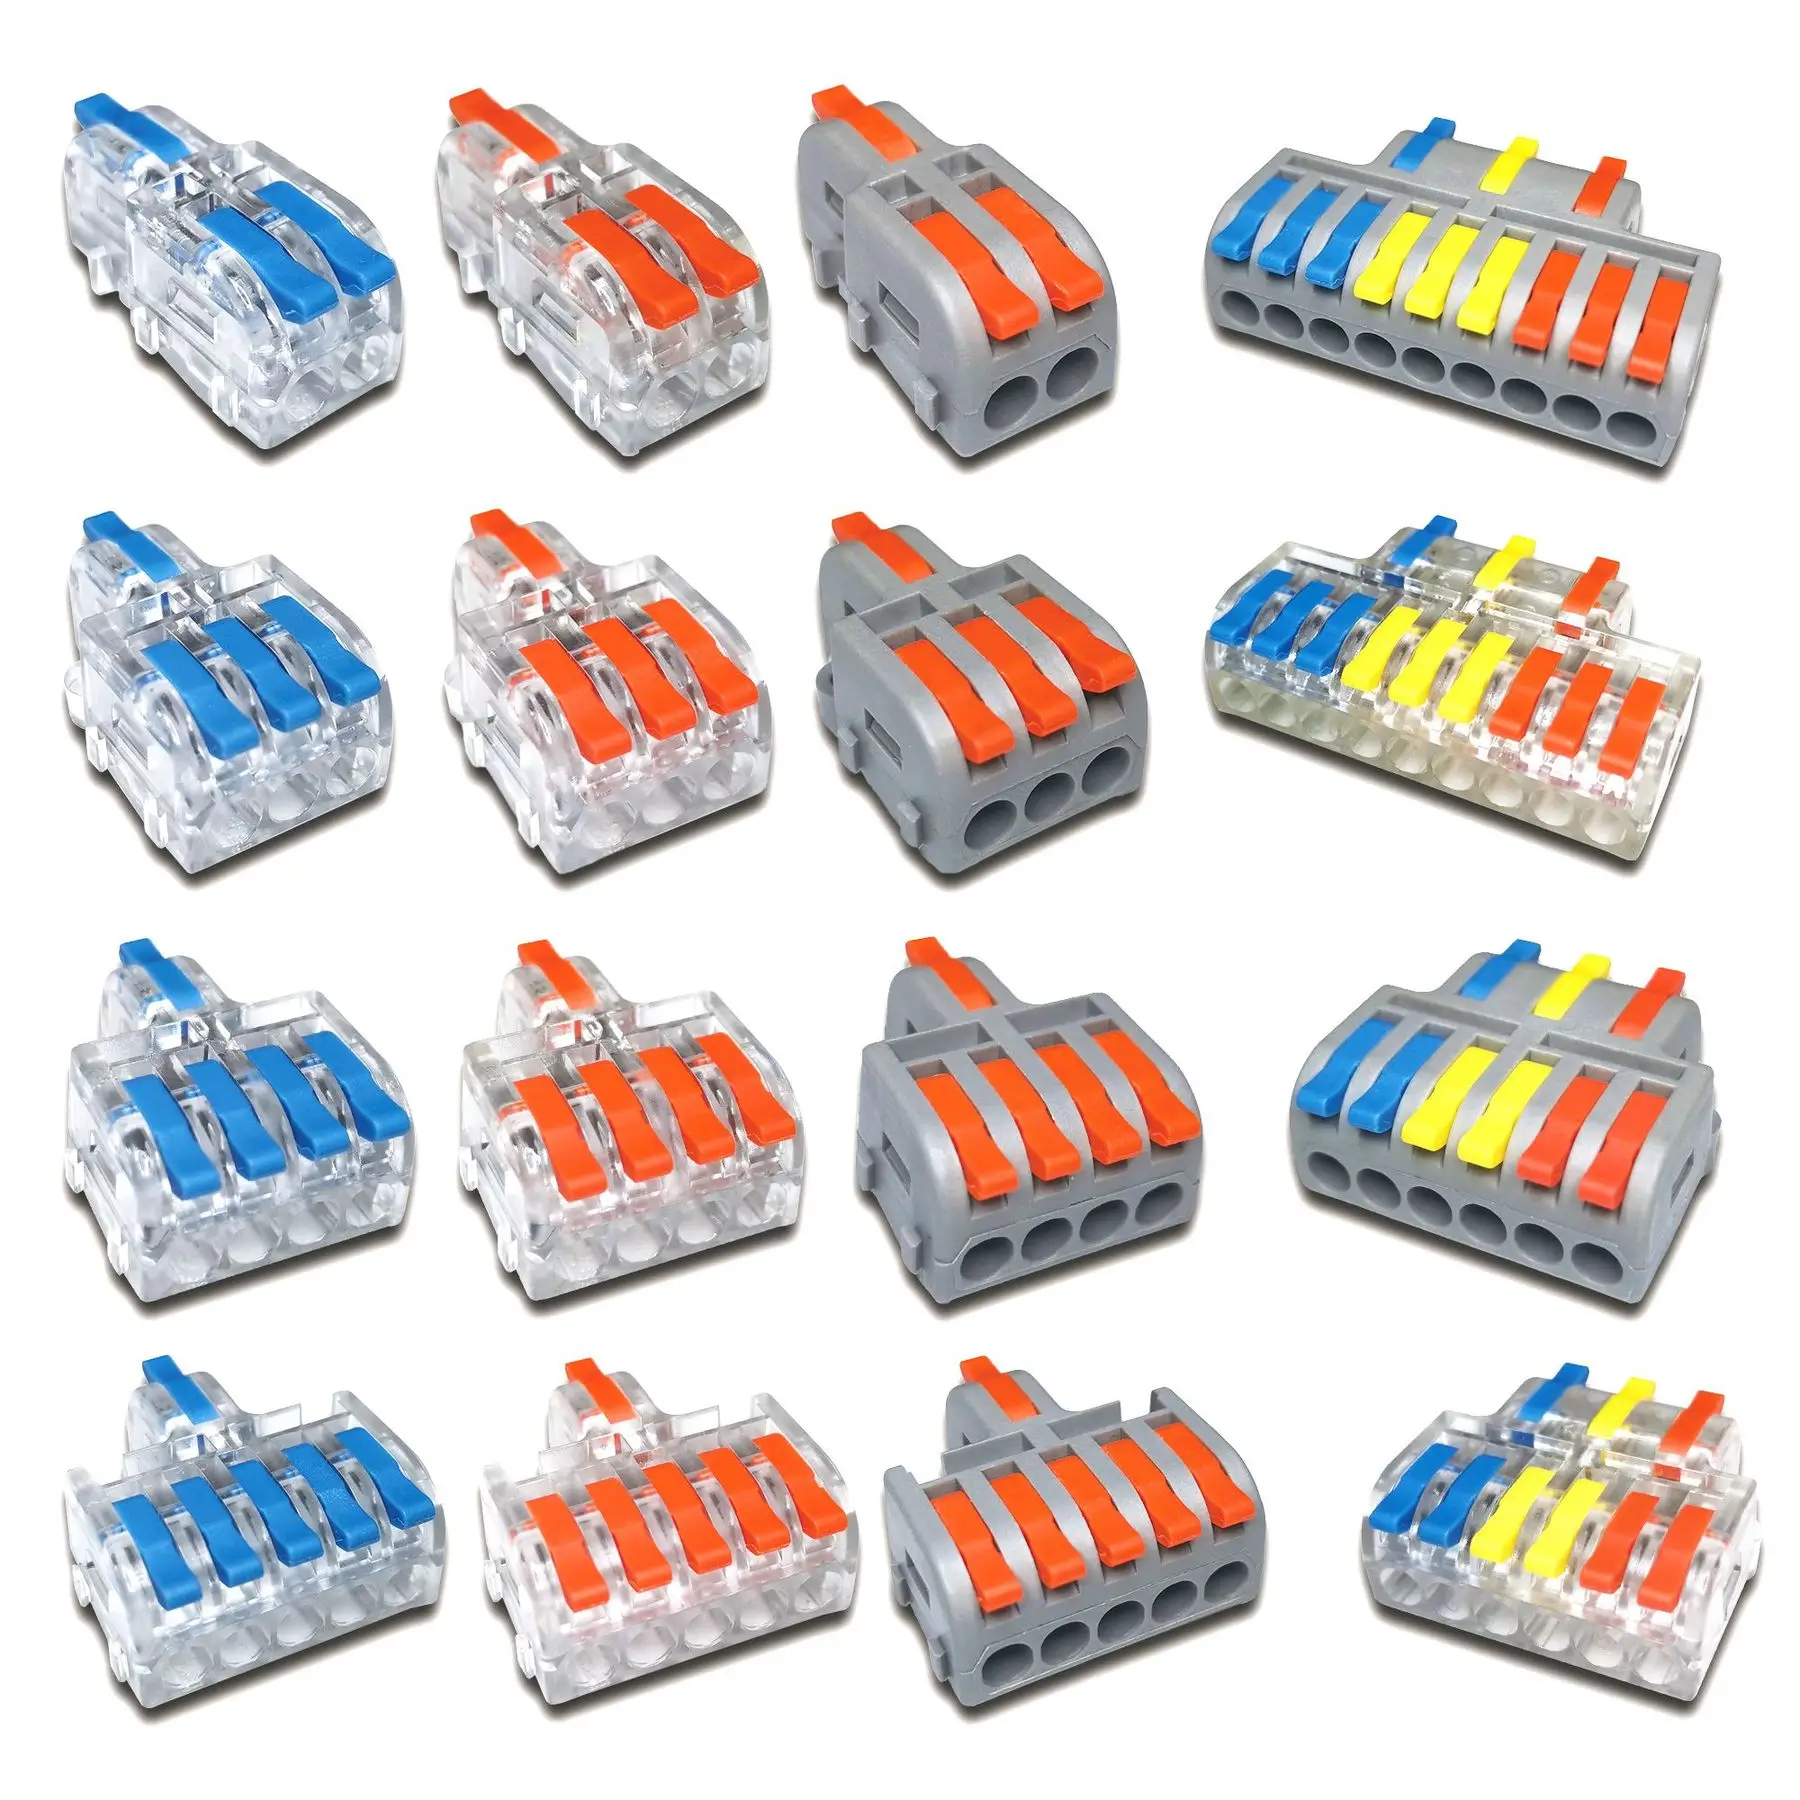 

Mini Fast Wire Cable Connectors Universal Compact Conductor Spring Splicing Wiring Connector Push-in Terminal Block 93/63